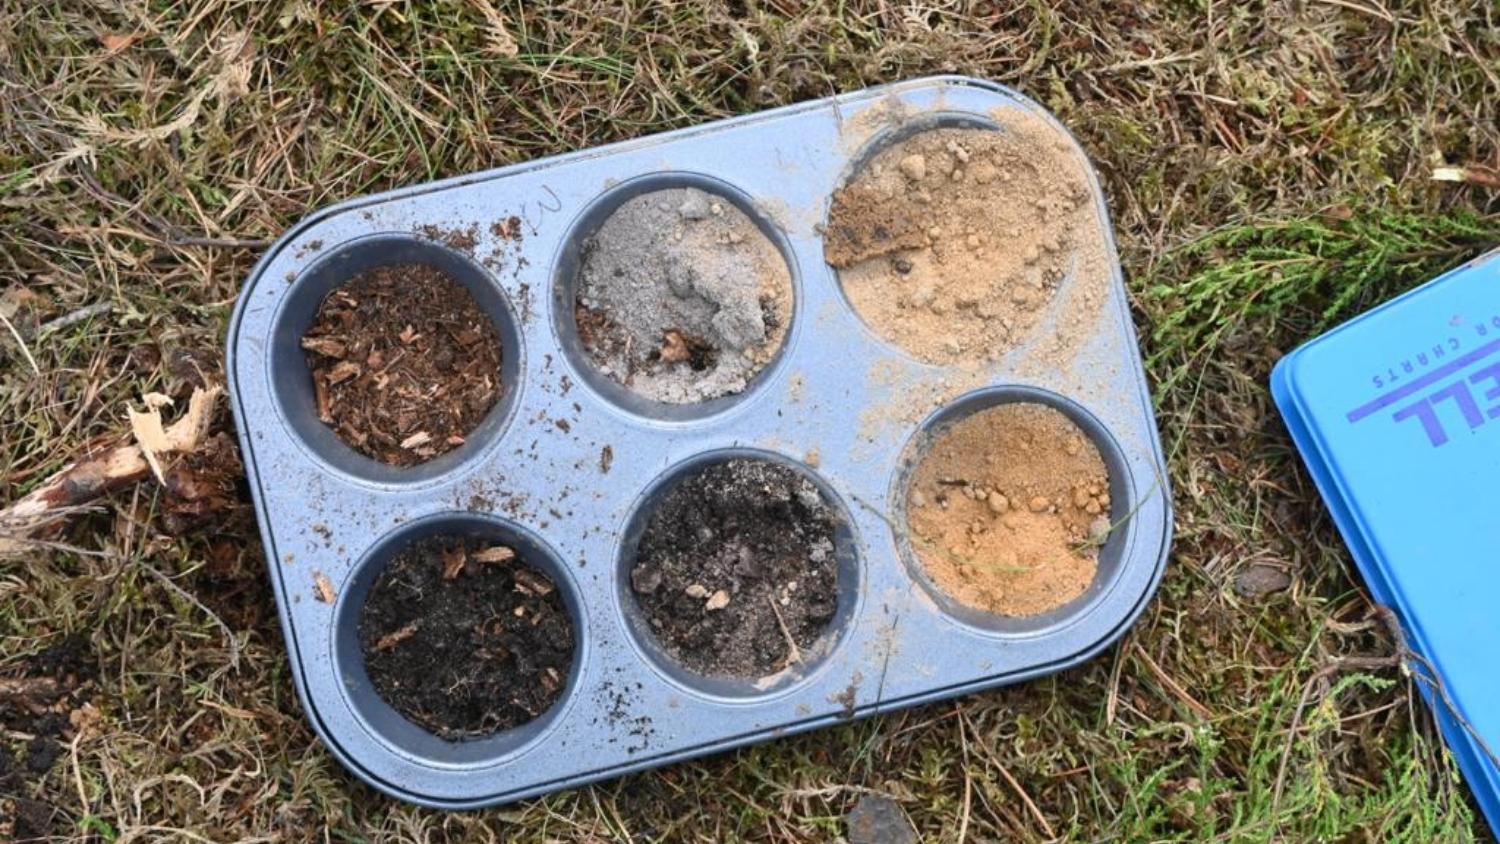 Soil samples from the World Soil Judging Contest in a pan